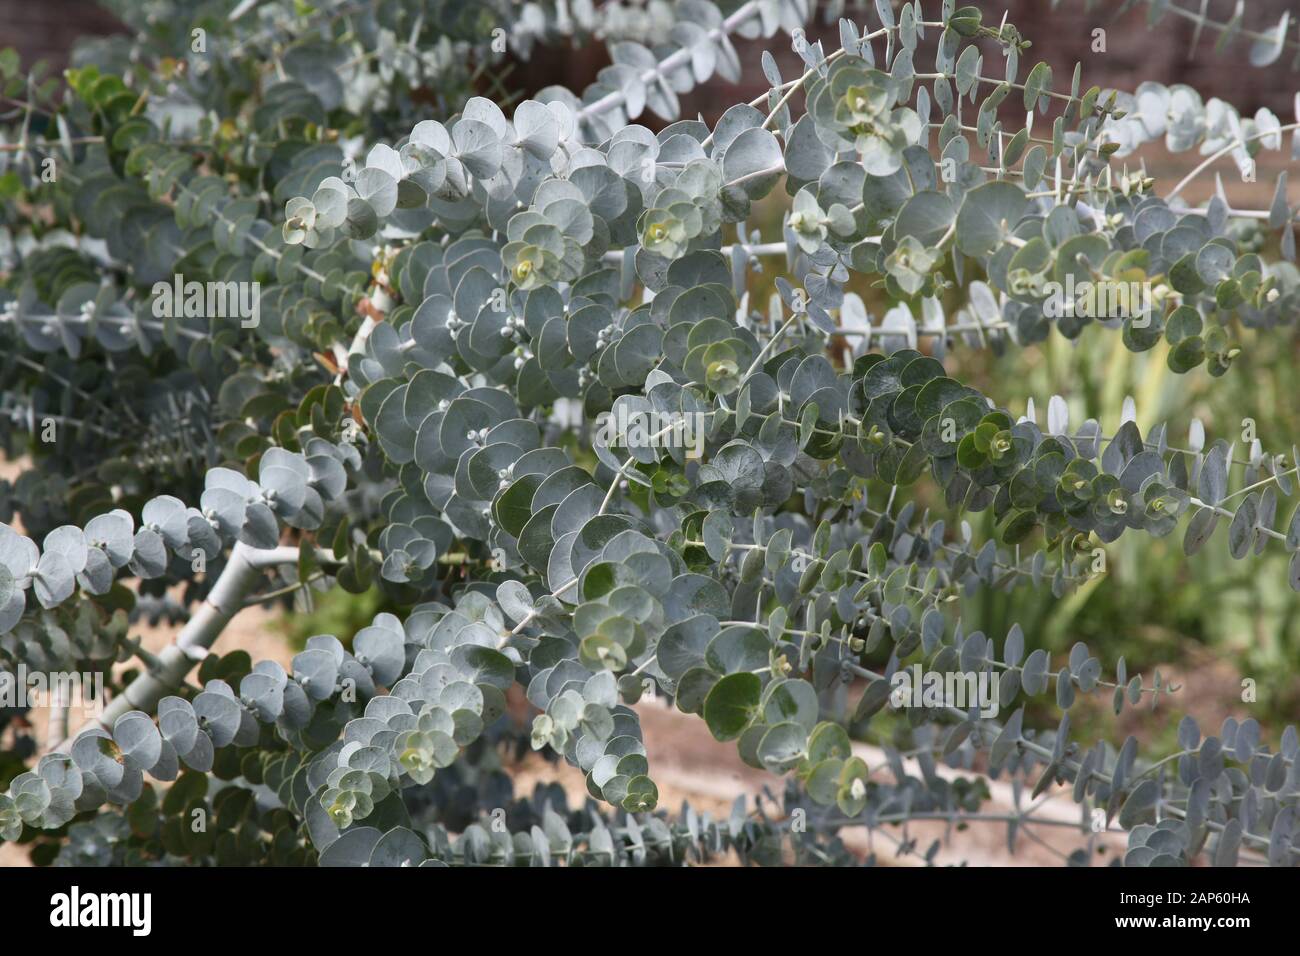 Eucalyptus leaves from a Baby Blue Stock Photo